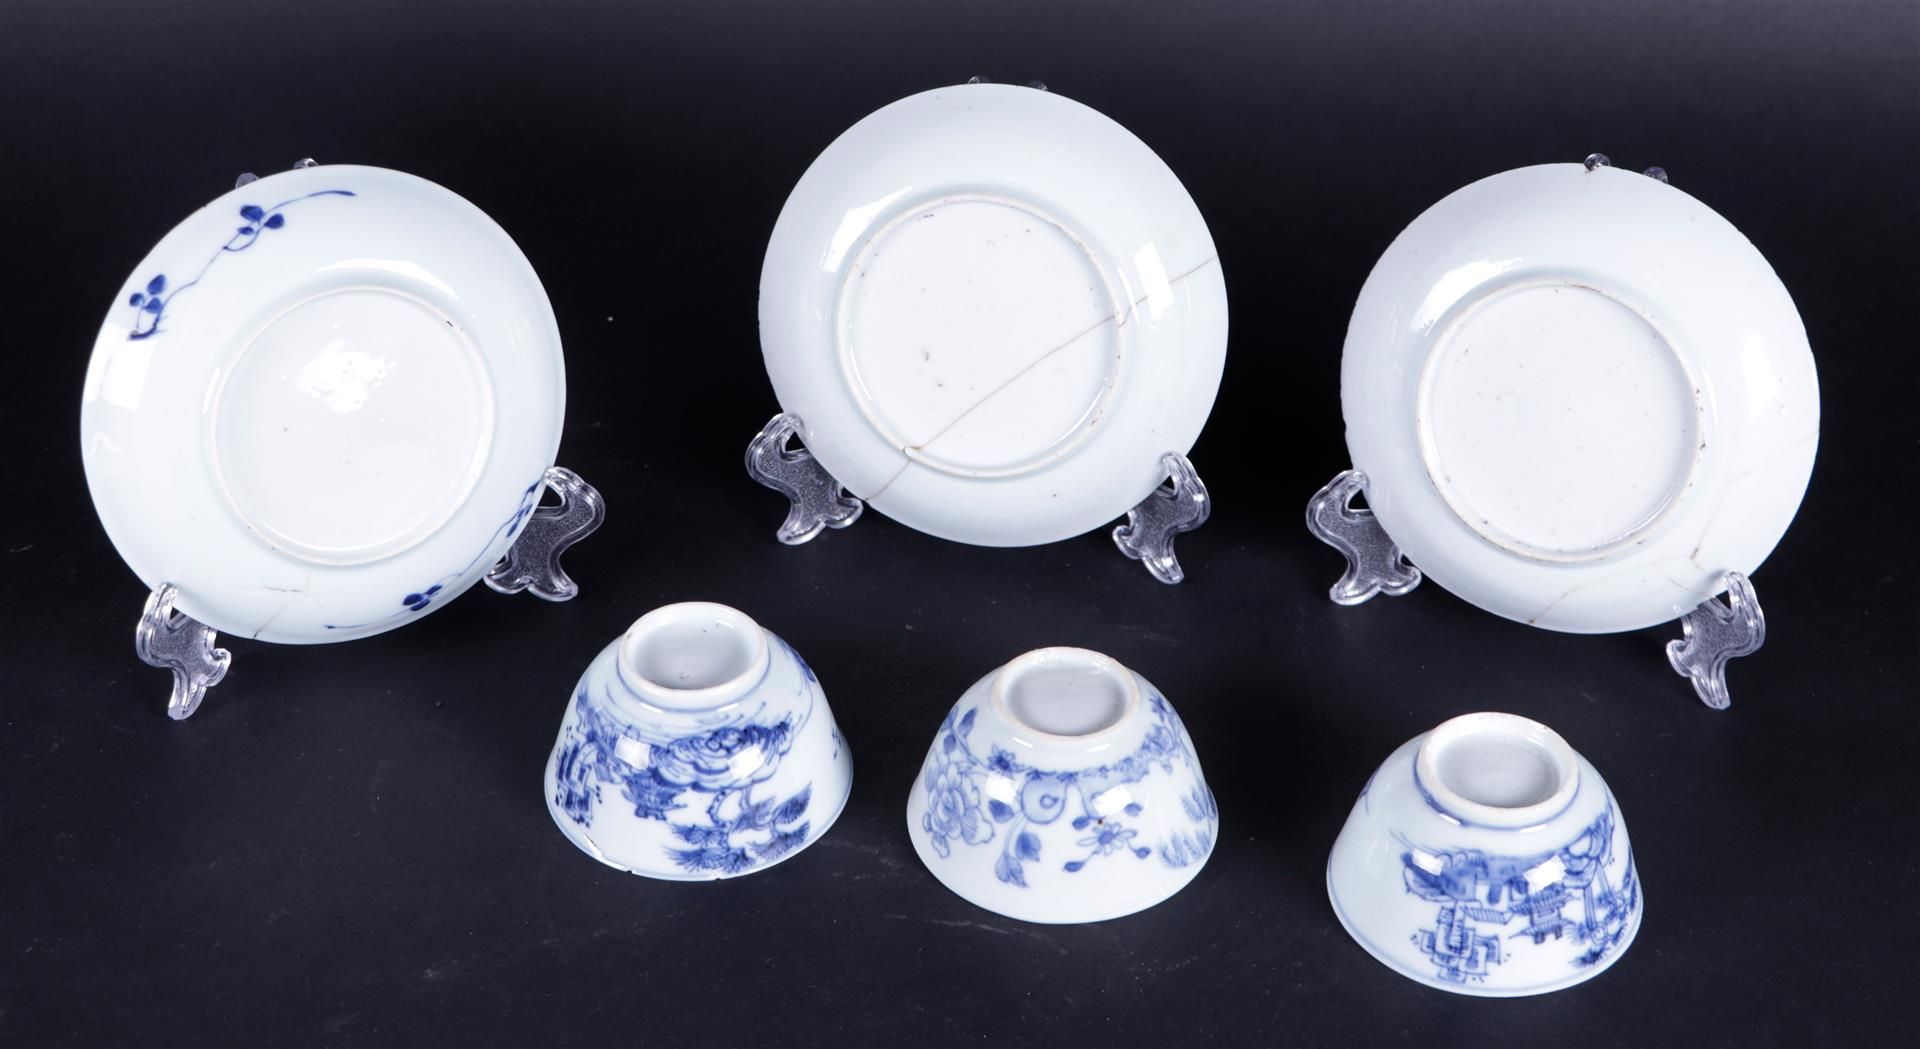 A set of (3) Porcelain cups and saucers blue-white with figures in river landscape, China, 18th cent - Image 2 of 2